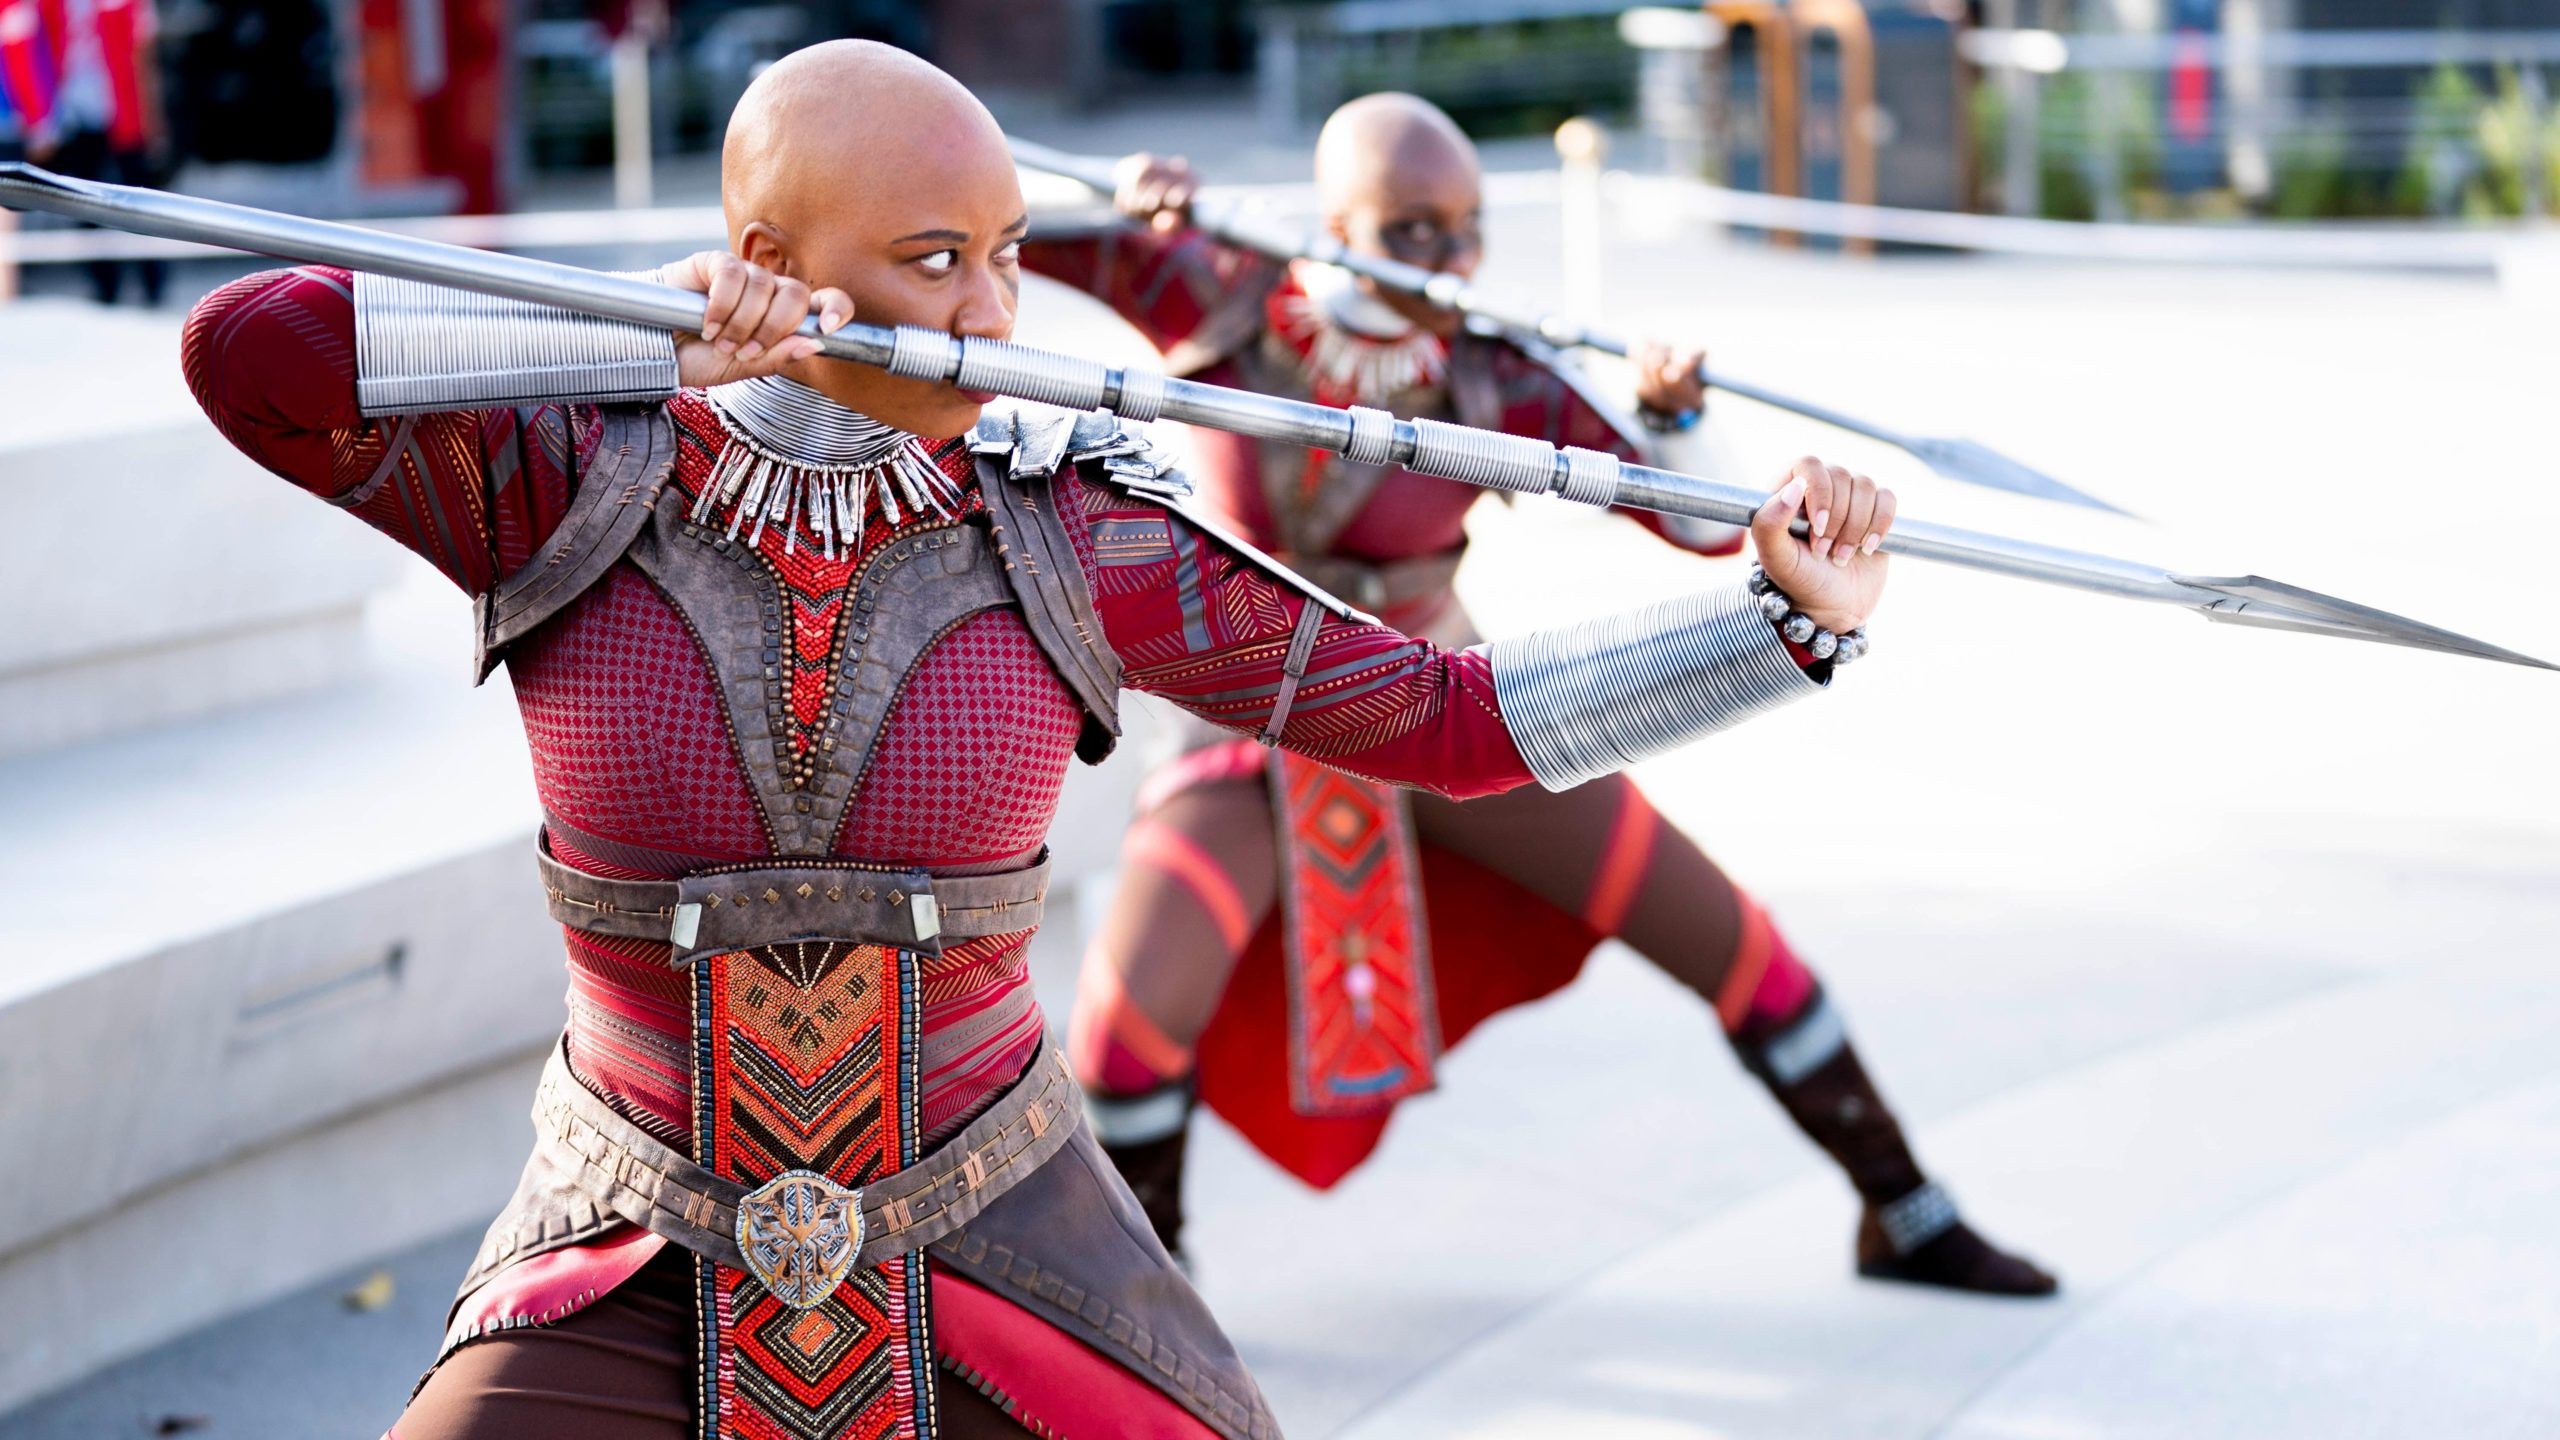 The Dora Milaje take command at the centre of campus. (Photo: Disney Parks)